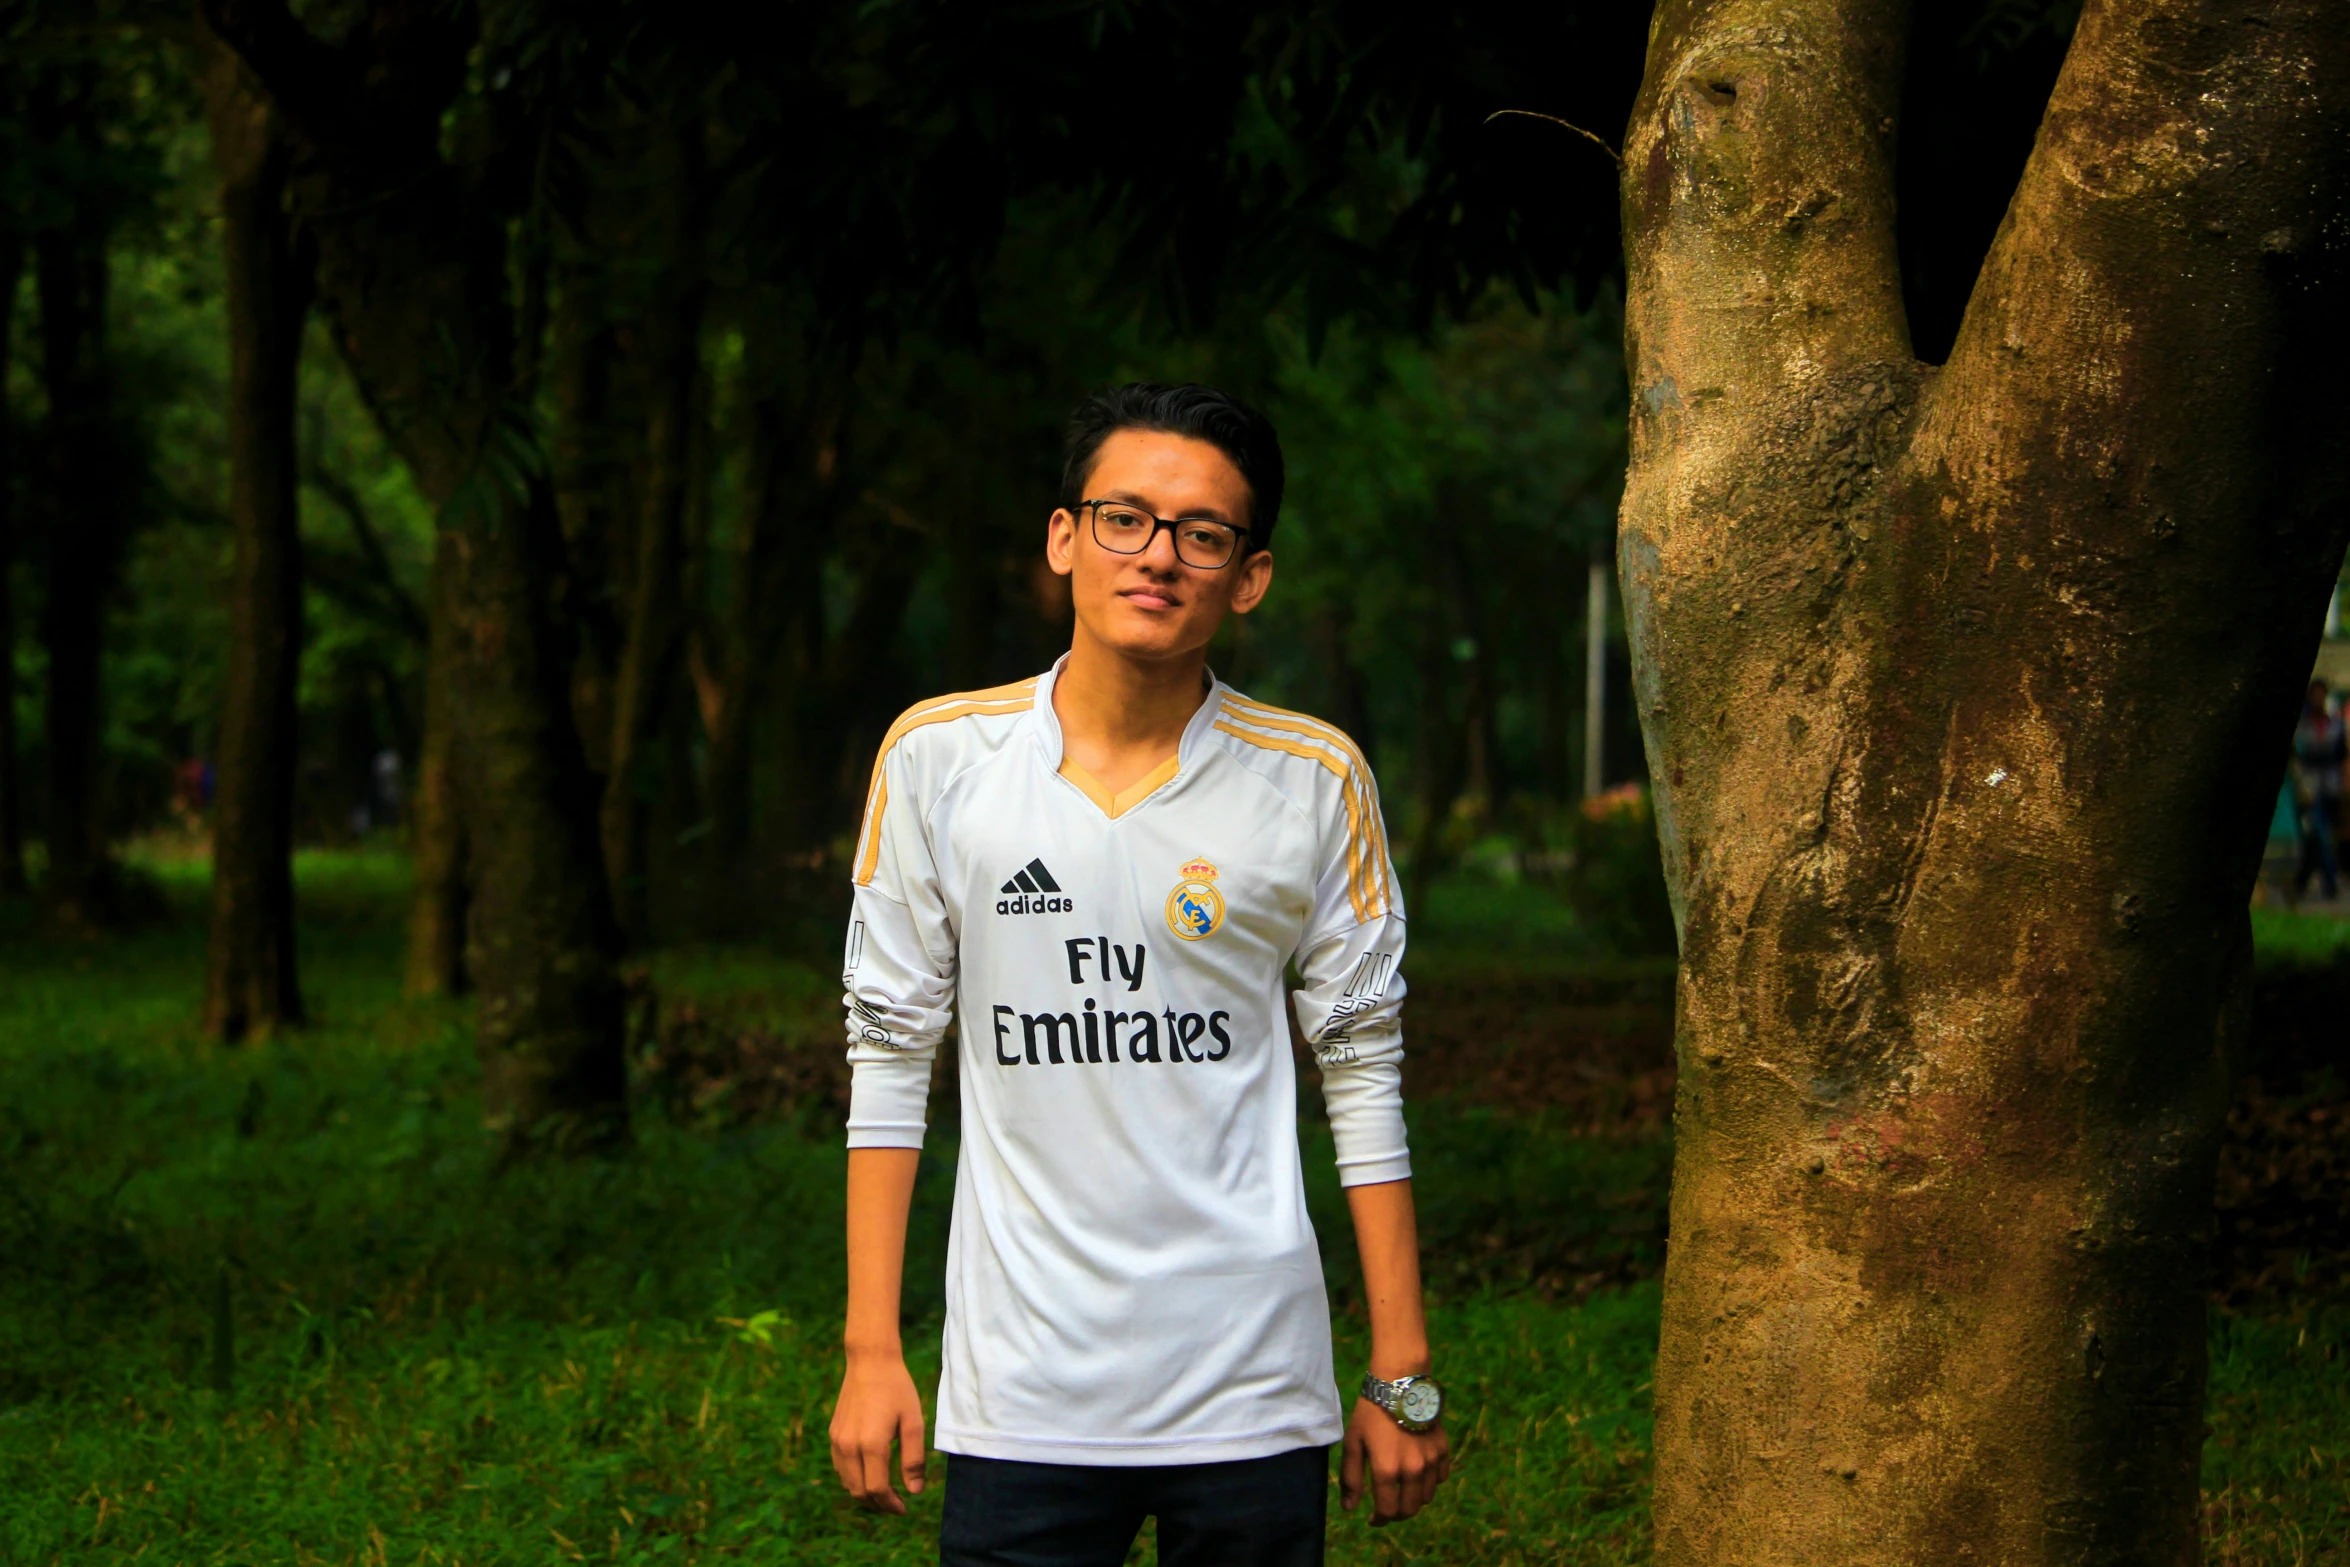 a man in a white and yellow soccer shirt standing next to a tree